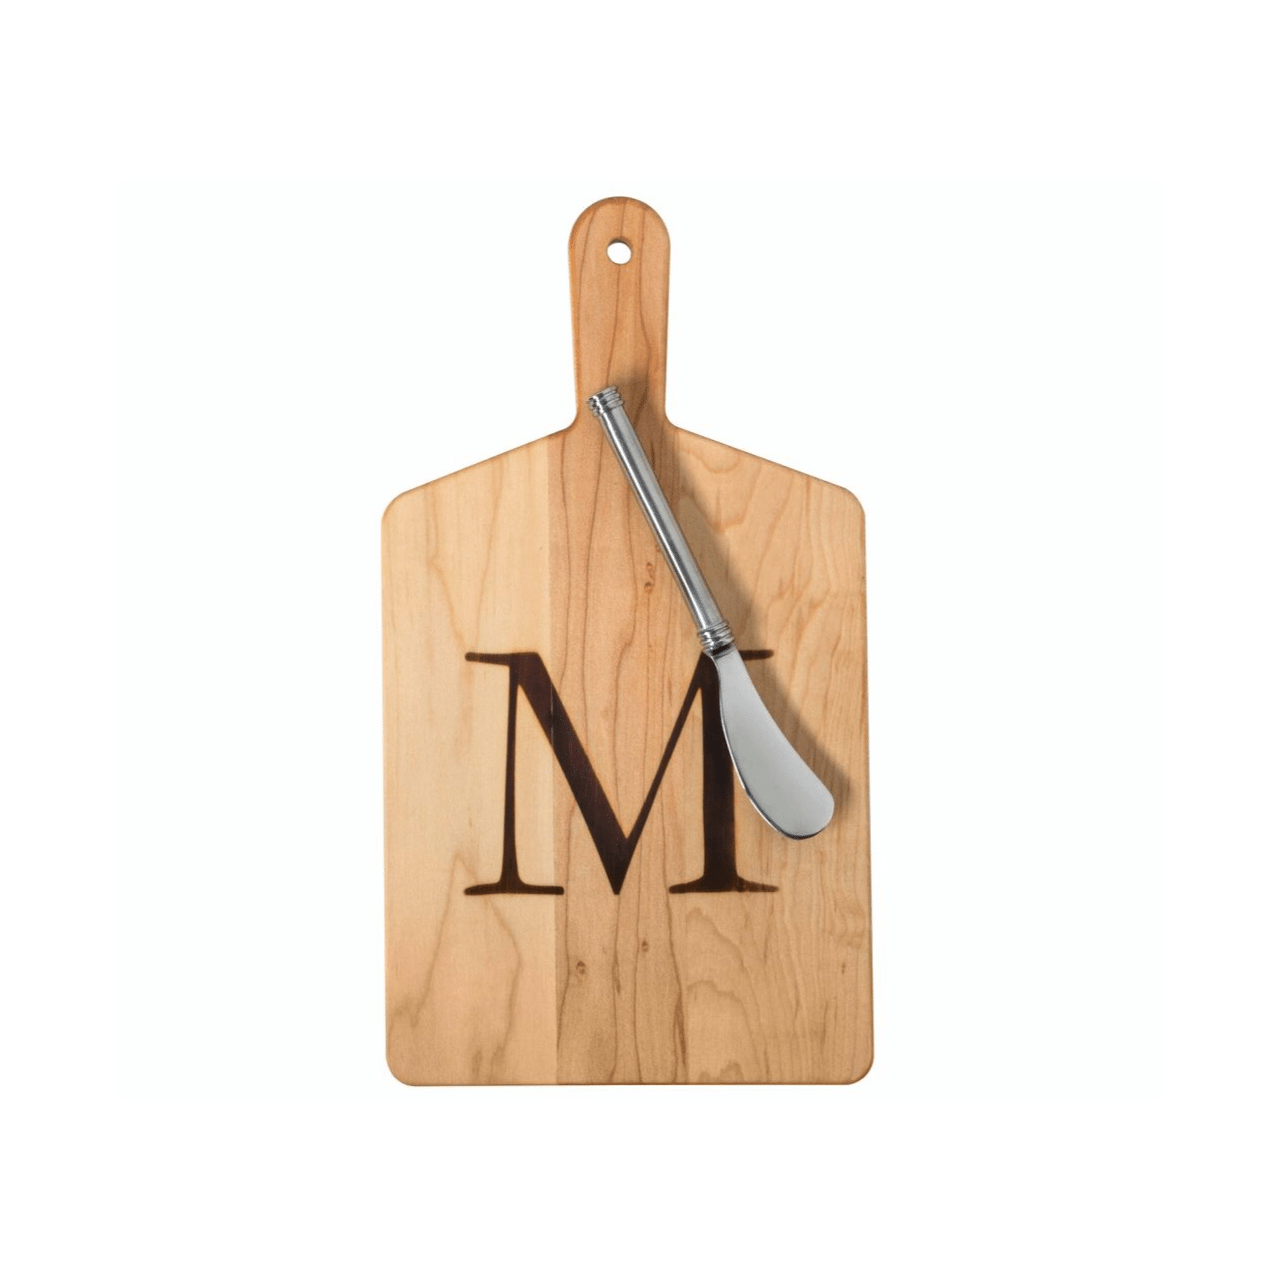 Maple Cheese Board with a Stamped J and Metal Spreader